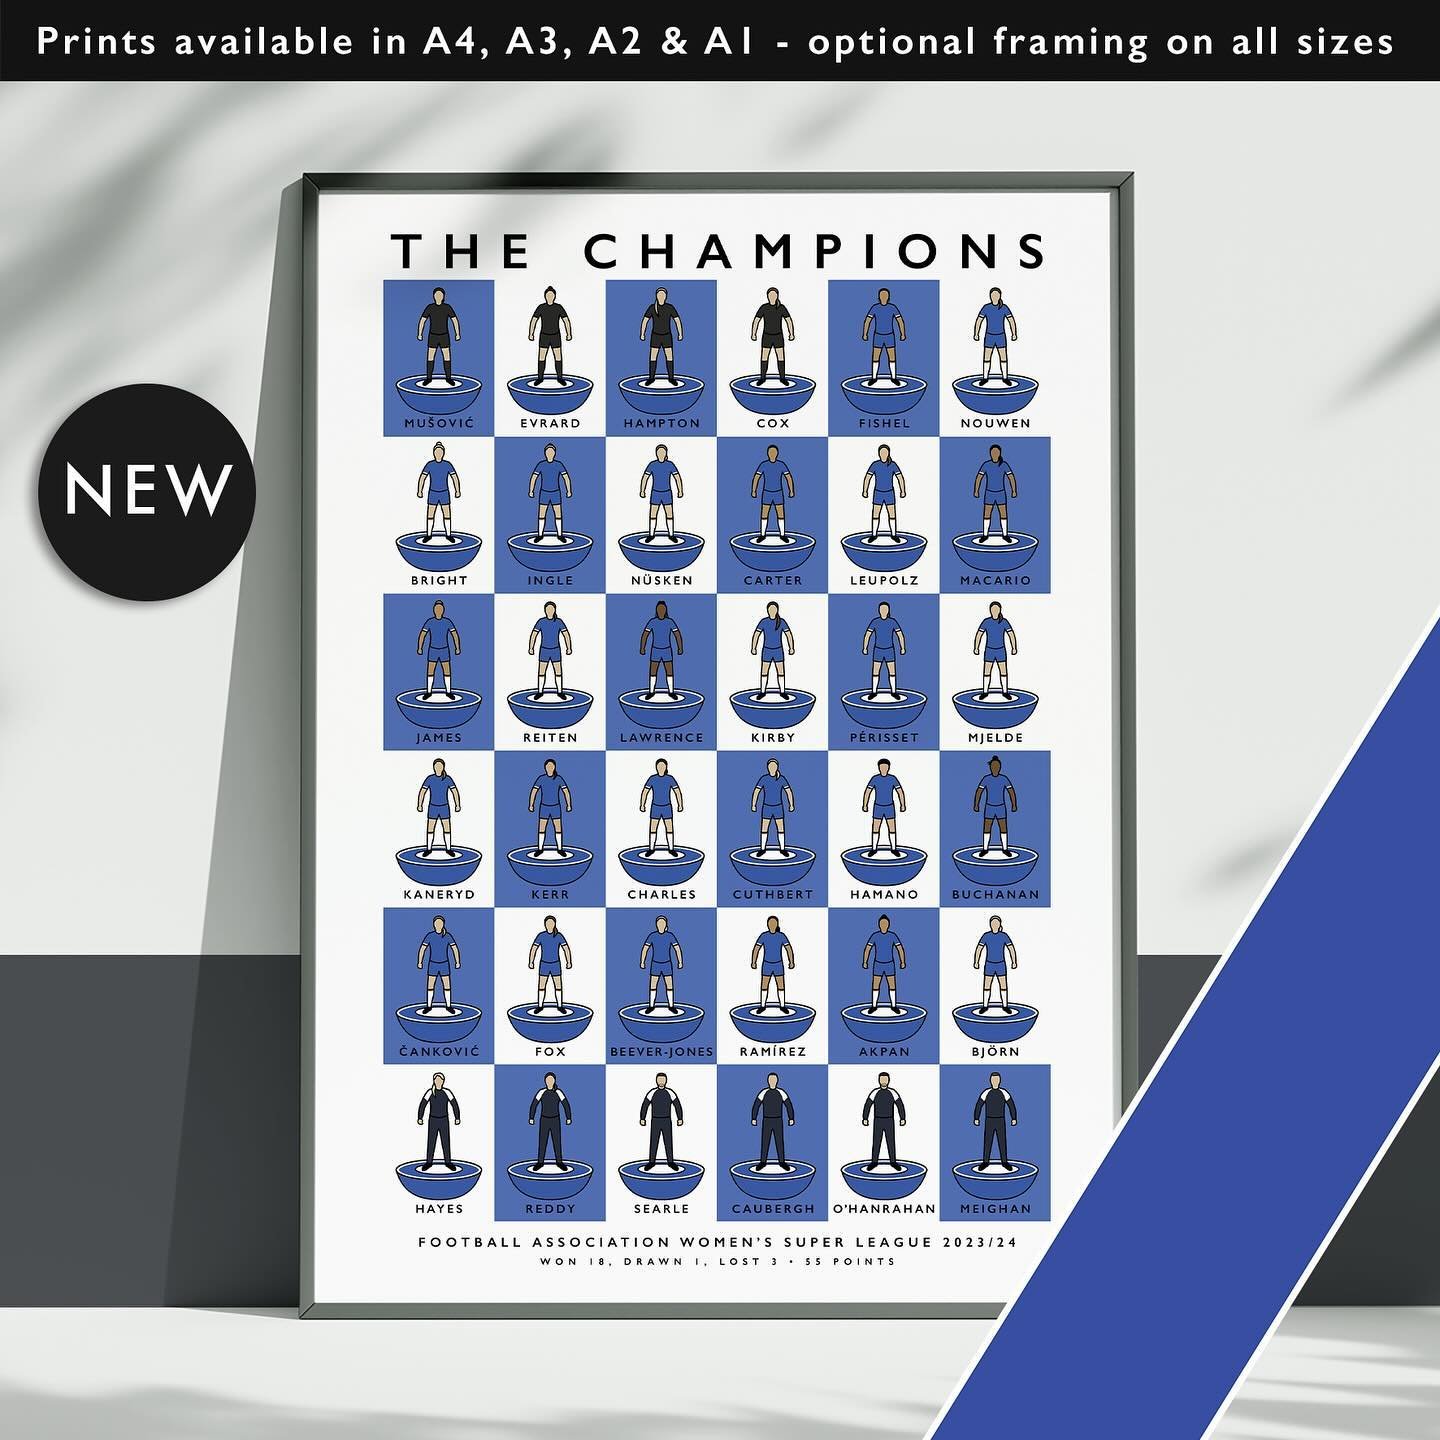 NEW: Chelsea FC Women The Champions Squad 23/24 

Get 10% off until midnight with the discount code
THE-BLUES 

Shop now: matthewjiwood.com/subbuteo-xis/c&hellip;

Prints available in A4, A3, A2 &amp; A1 with optional framing

#CFCW #Chelsea #WSL #fo